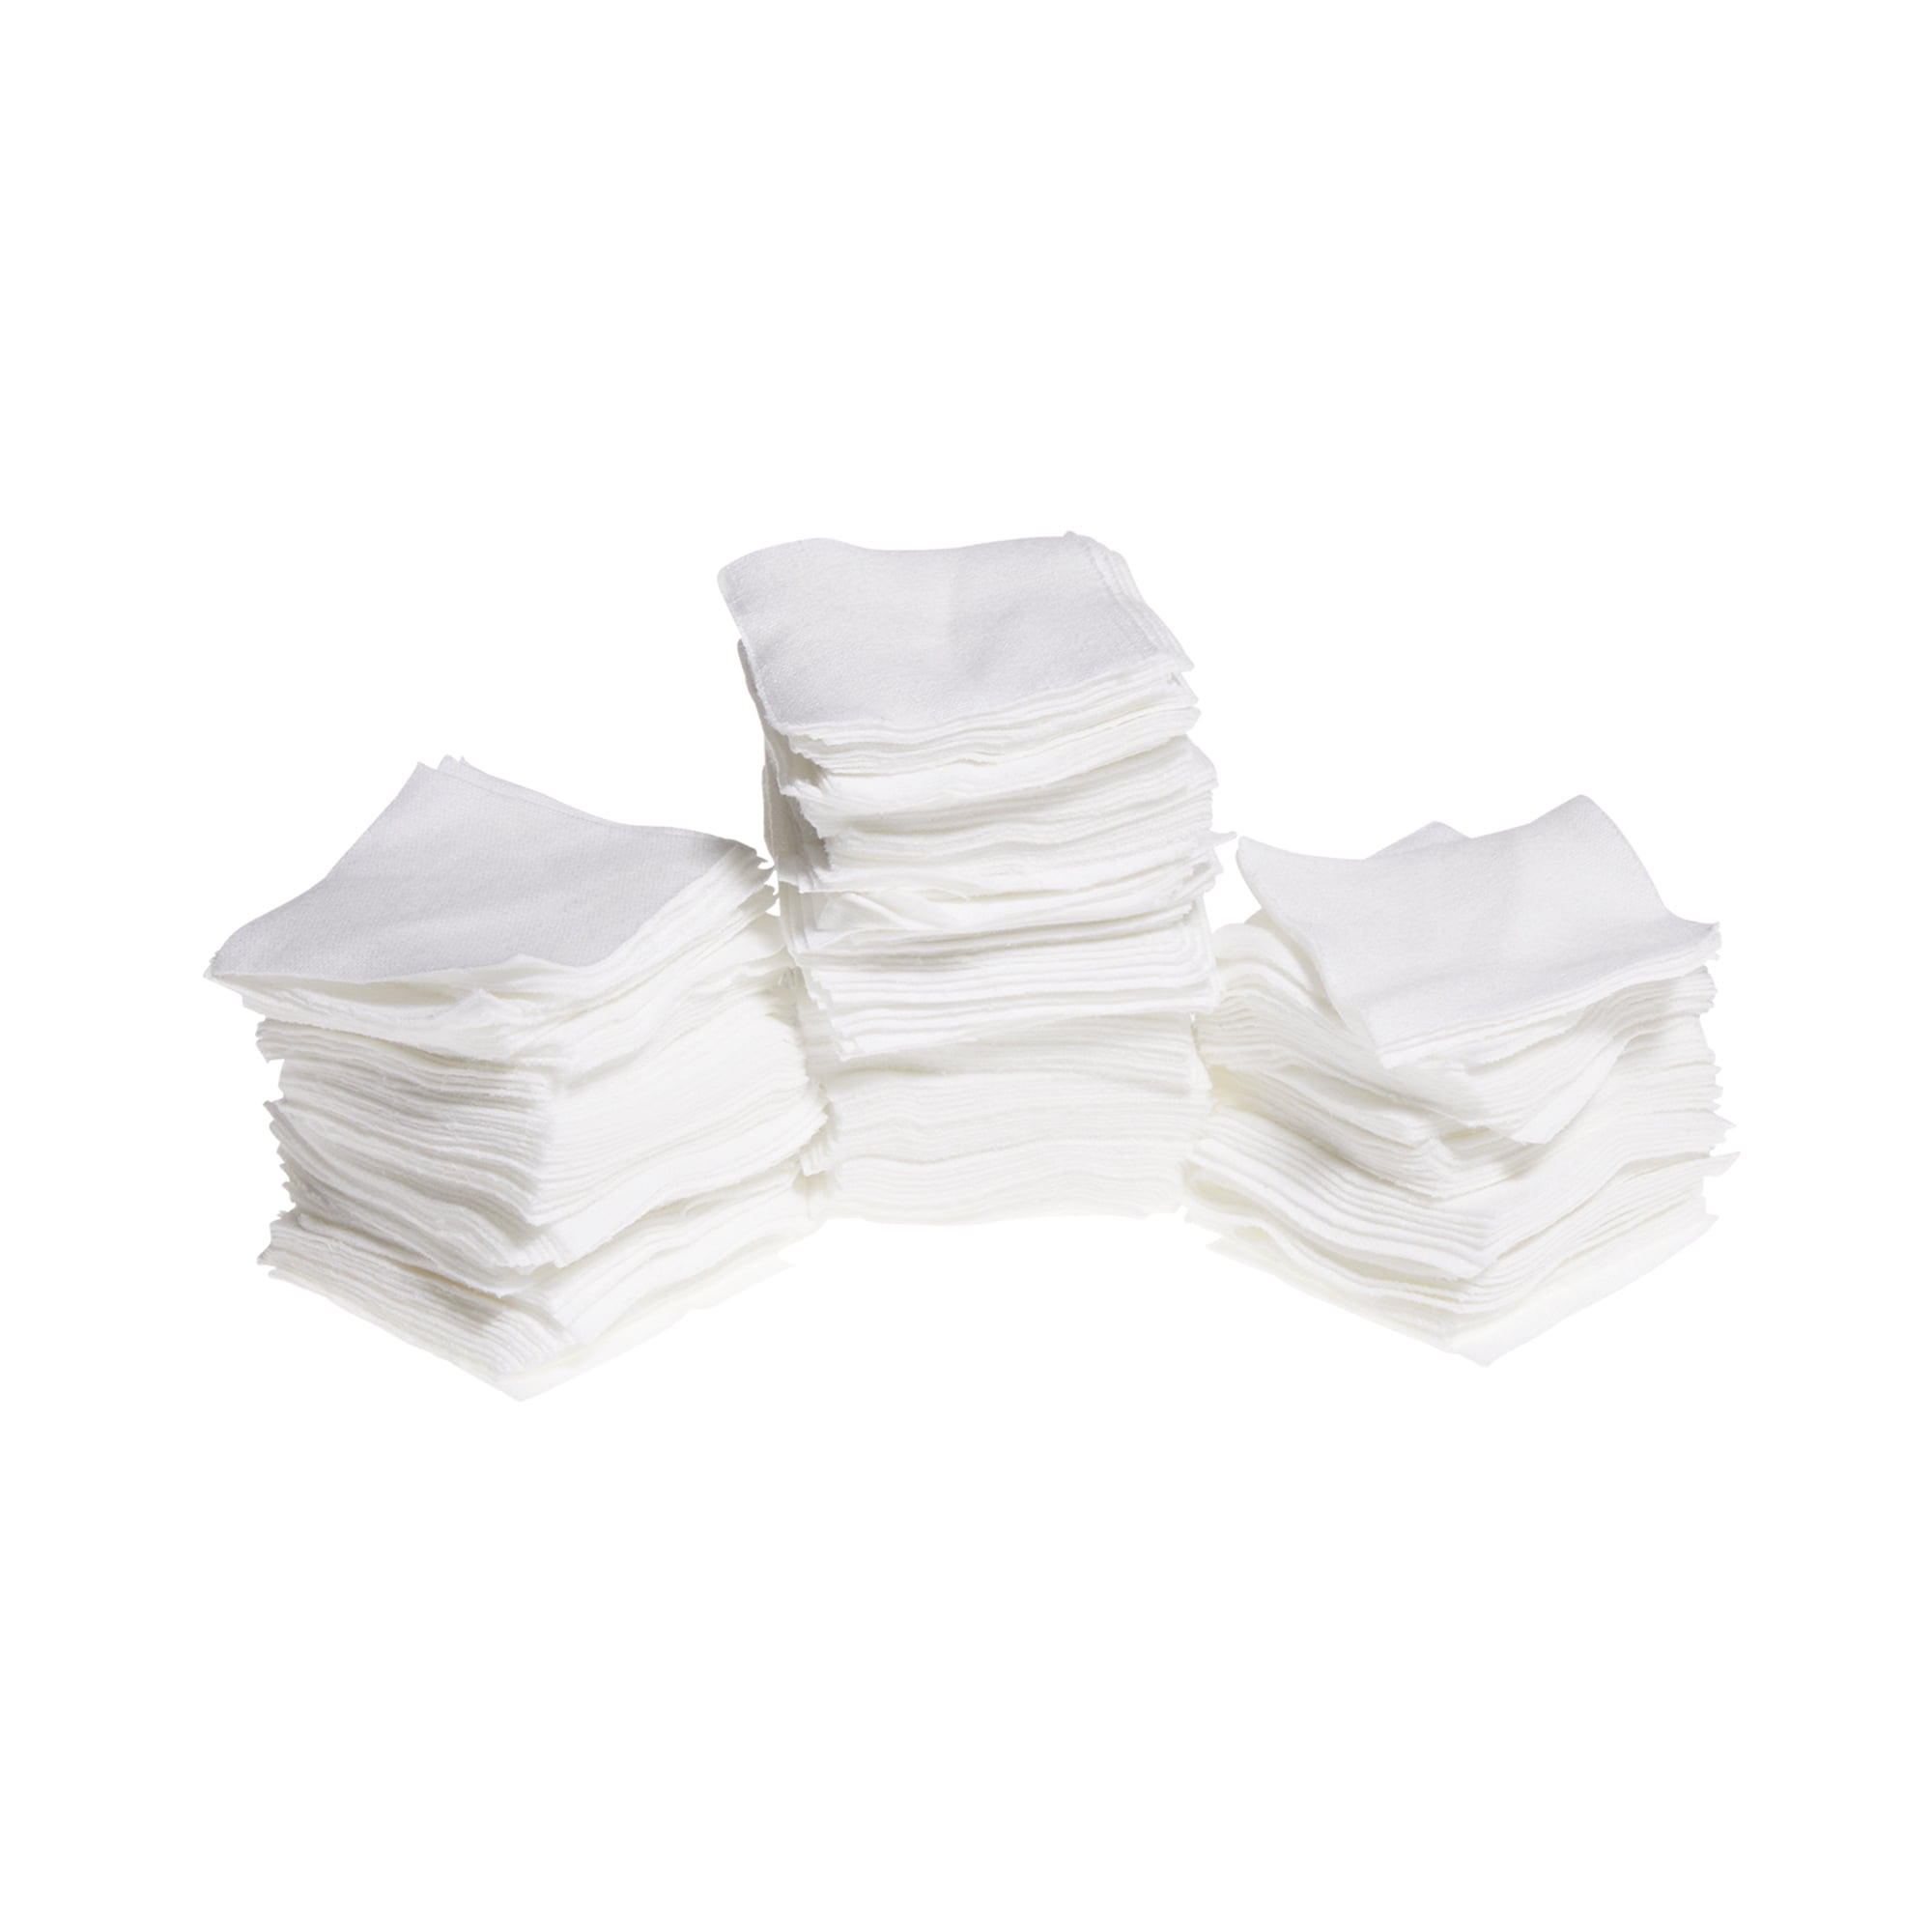 Allen Cases Cotton Patches Value Pack 400 PC 1 in 70751 for sale online 